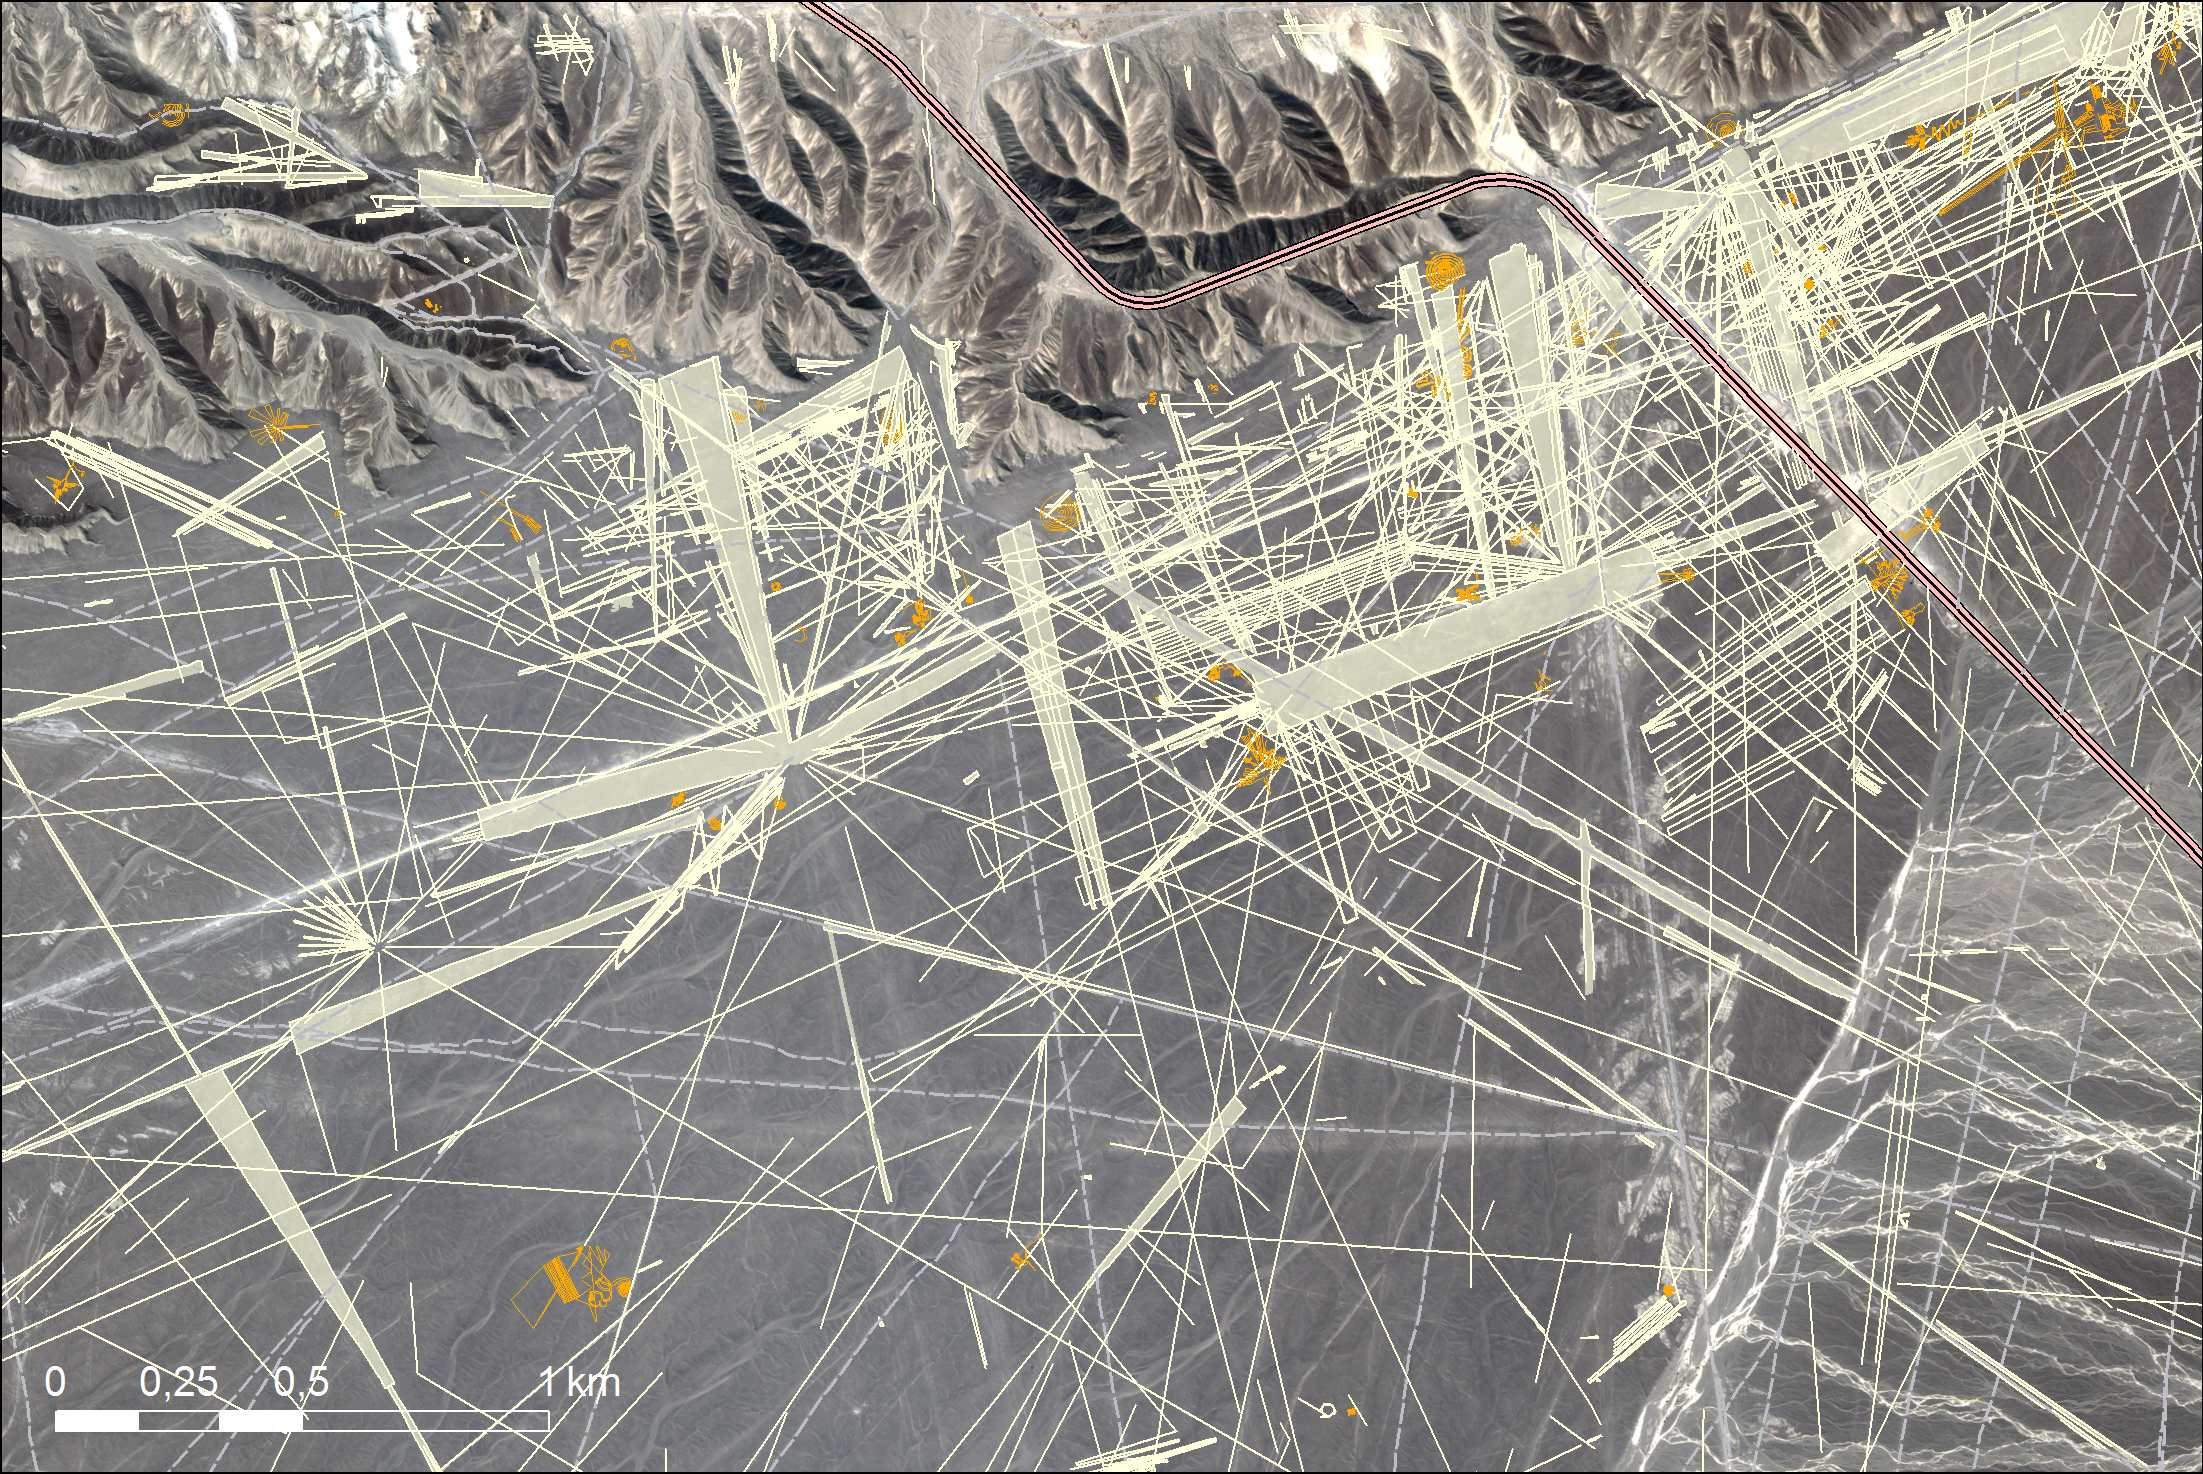 Digitization of ground drawings in aerial and satellite images